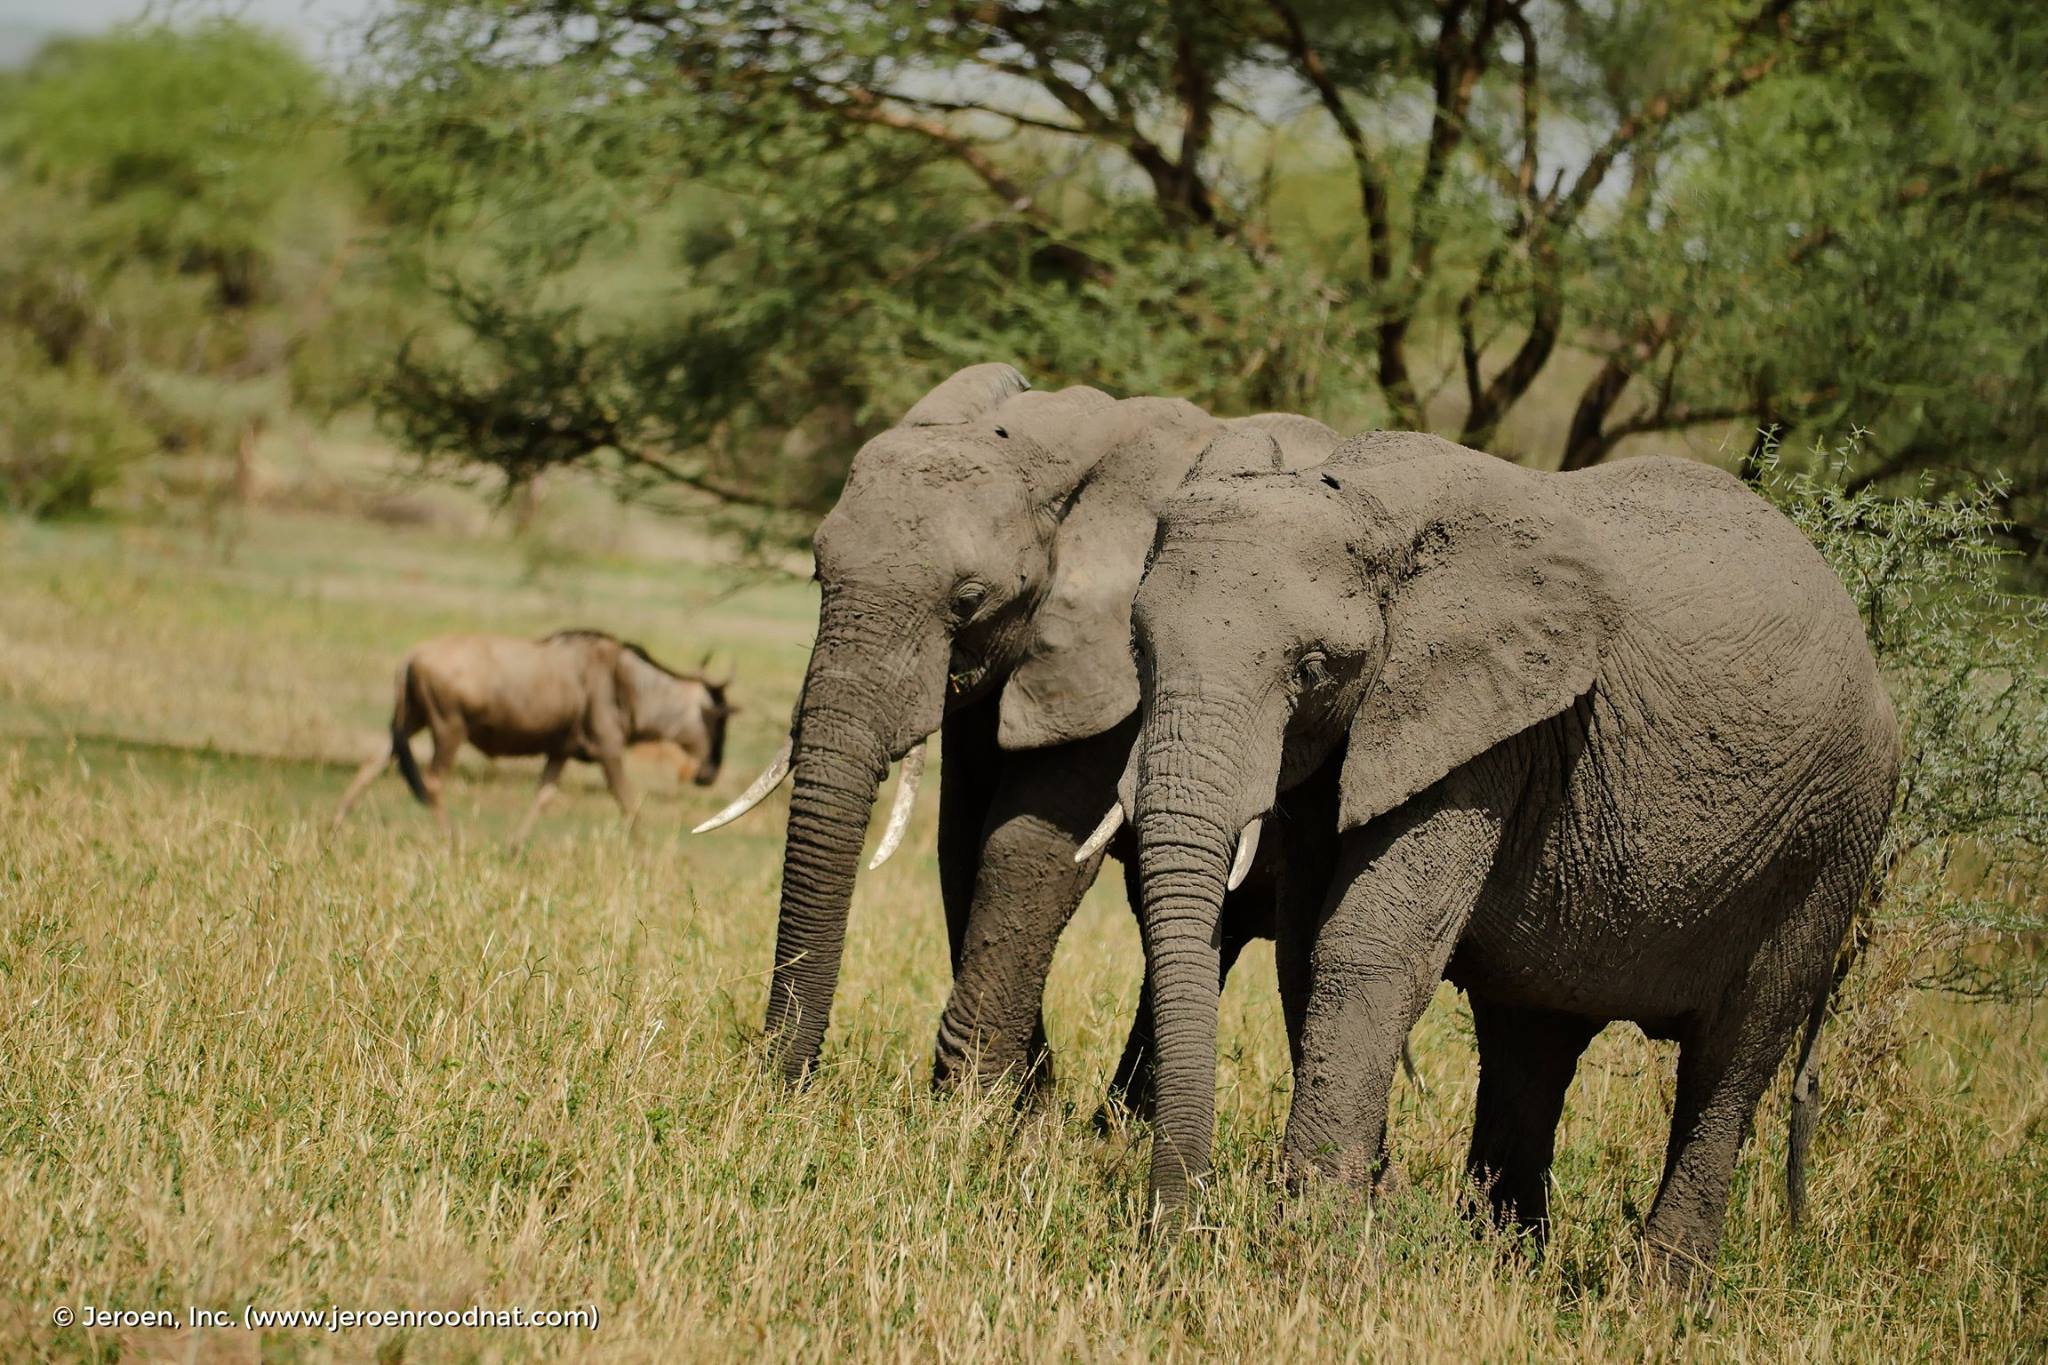 Elephant populations continue to fall due to illegal killing and other human activities, while seizures of large-scale illegal ivory shipments were at record highs in 2016.